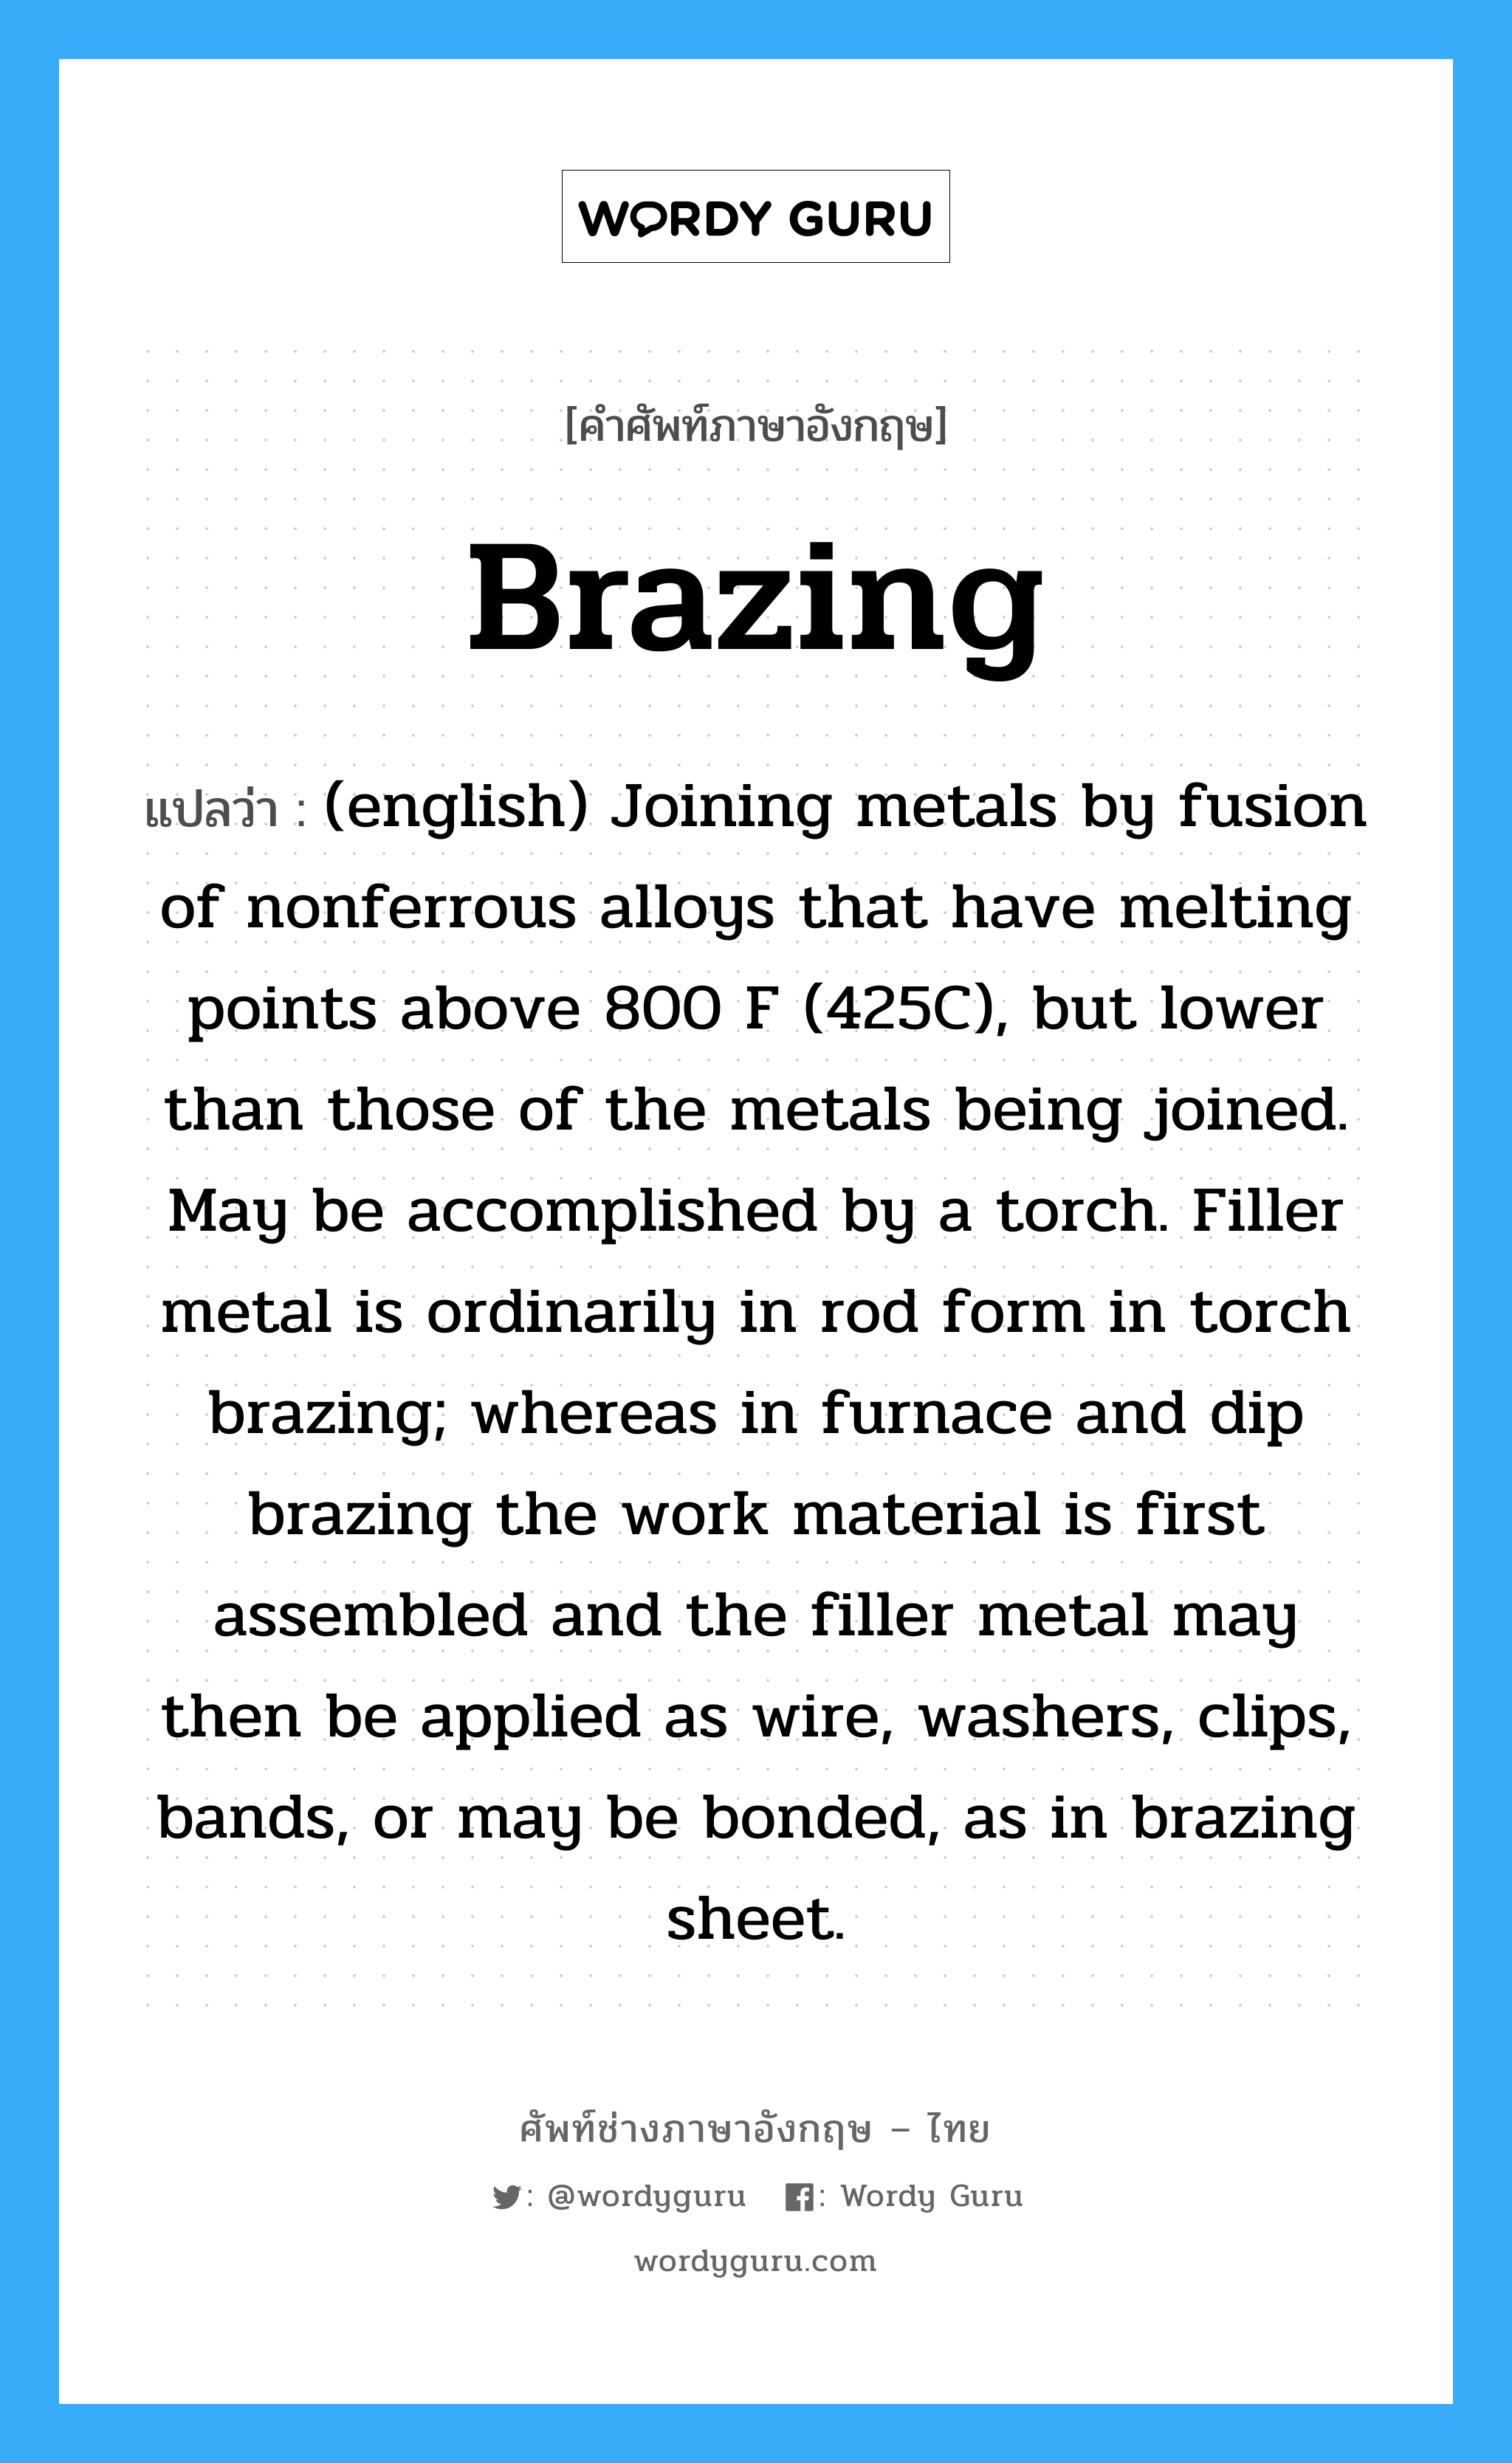 Brazing แปลว่า?, คำศัพท์ช่างภาษาอังกฤษ - ไทย Brazing คำศัพท์ภาษาอังกฤษ Brazing แปลว่า (english) Joining metals by fusion of nonferrous alloys that have melting points above 800 F (425C), but lower than those of the metals being joined. May be accomplished by a torch. Filler metal is ordinarily in rod form in torch brazing; whereas in furnace and dip brazing the work material is first assembled and the filler metal may then be applied as wire, washers, clips, bands, or may be bonded, as in brazing sheet.